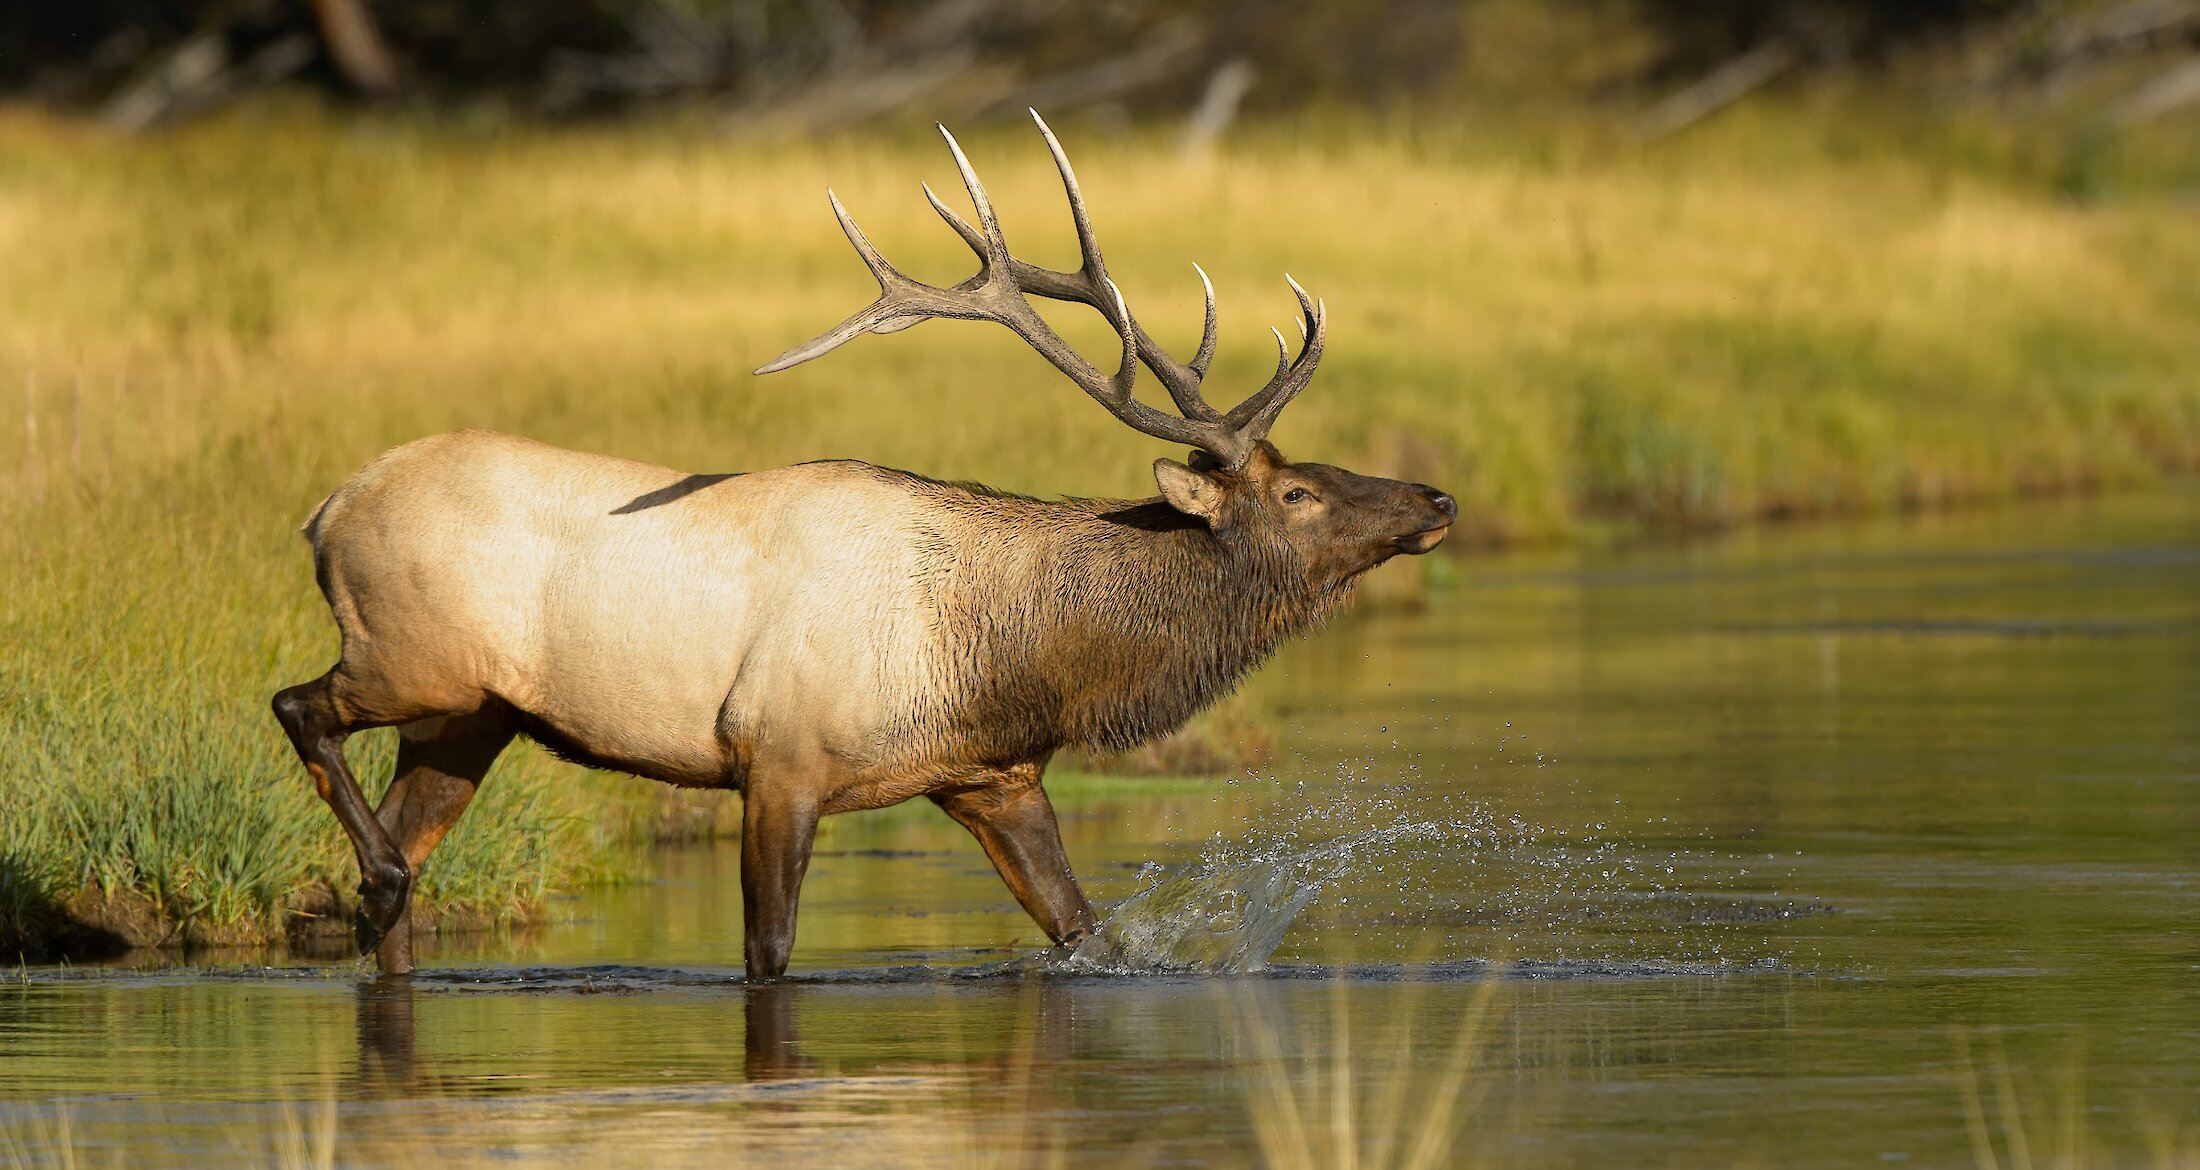 An Elk crossing the water in Banff National Park